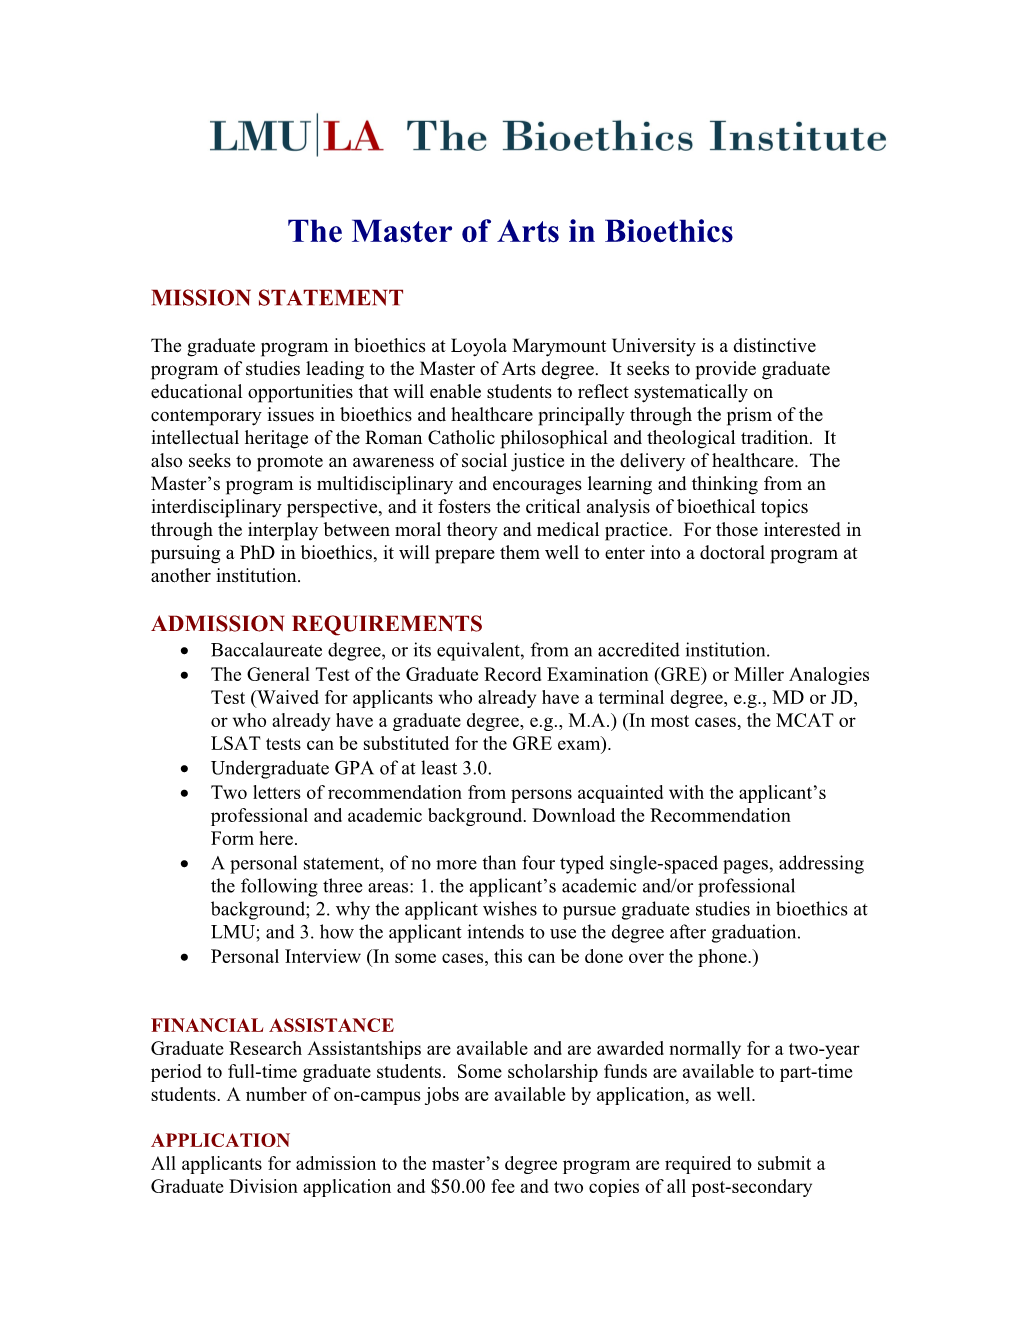 The Master of Arts in Bioethics